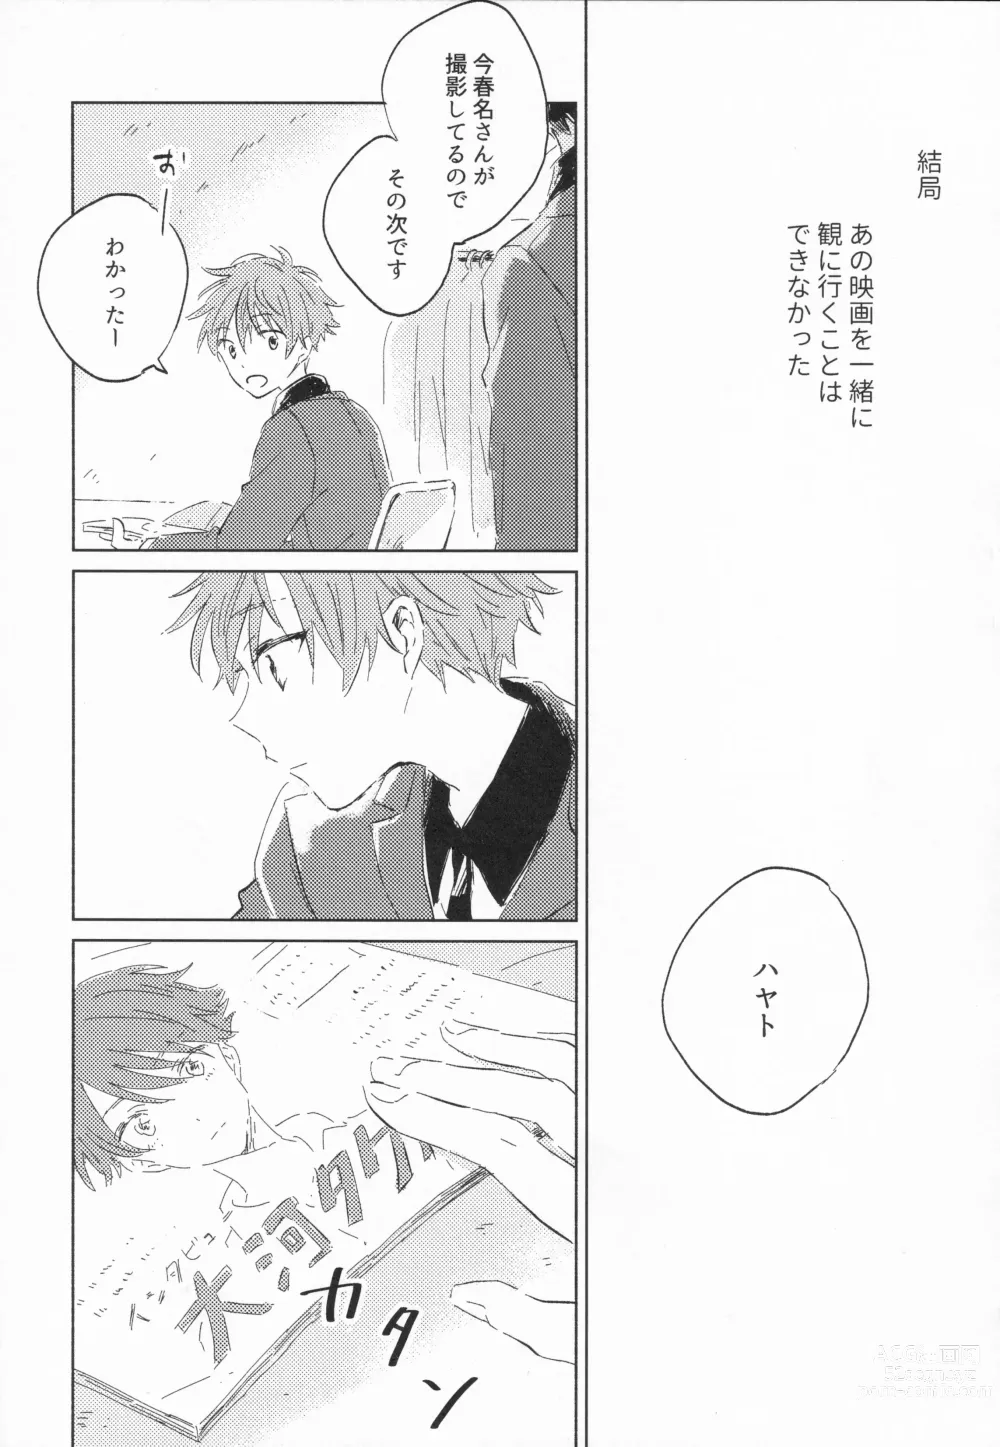 Page 4 of doujinshi 21-ji ni Machiawase - On the stroke of 9pm, the spell will be broken